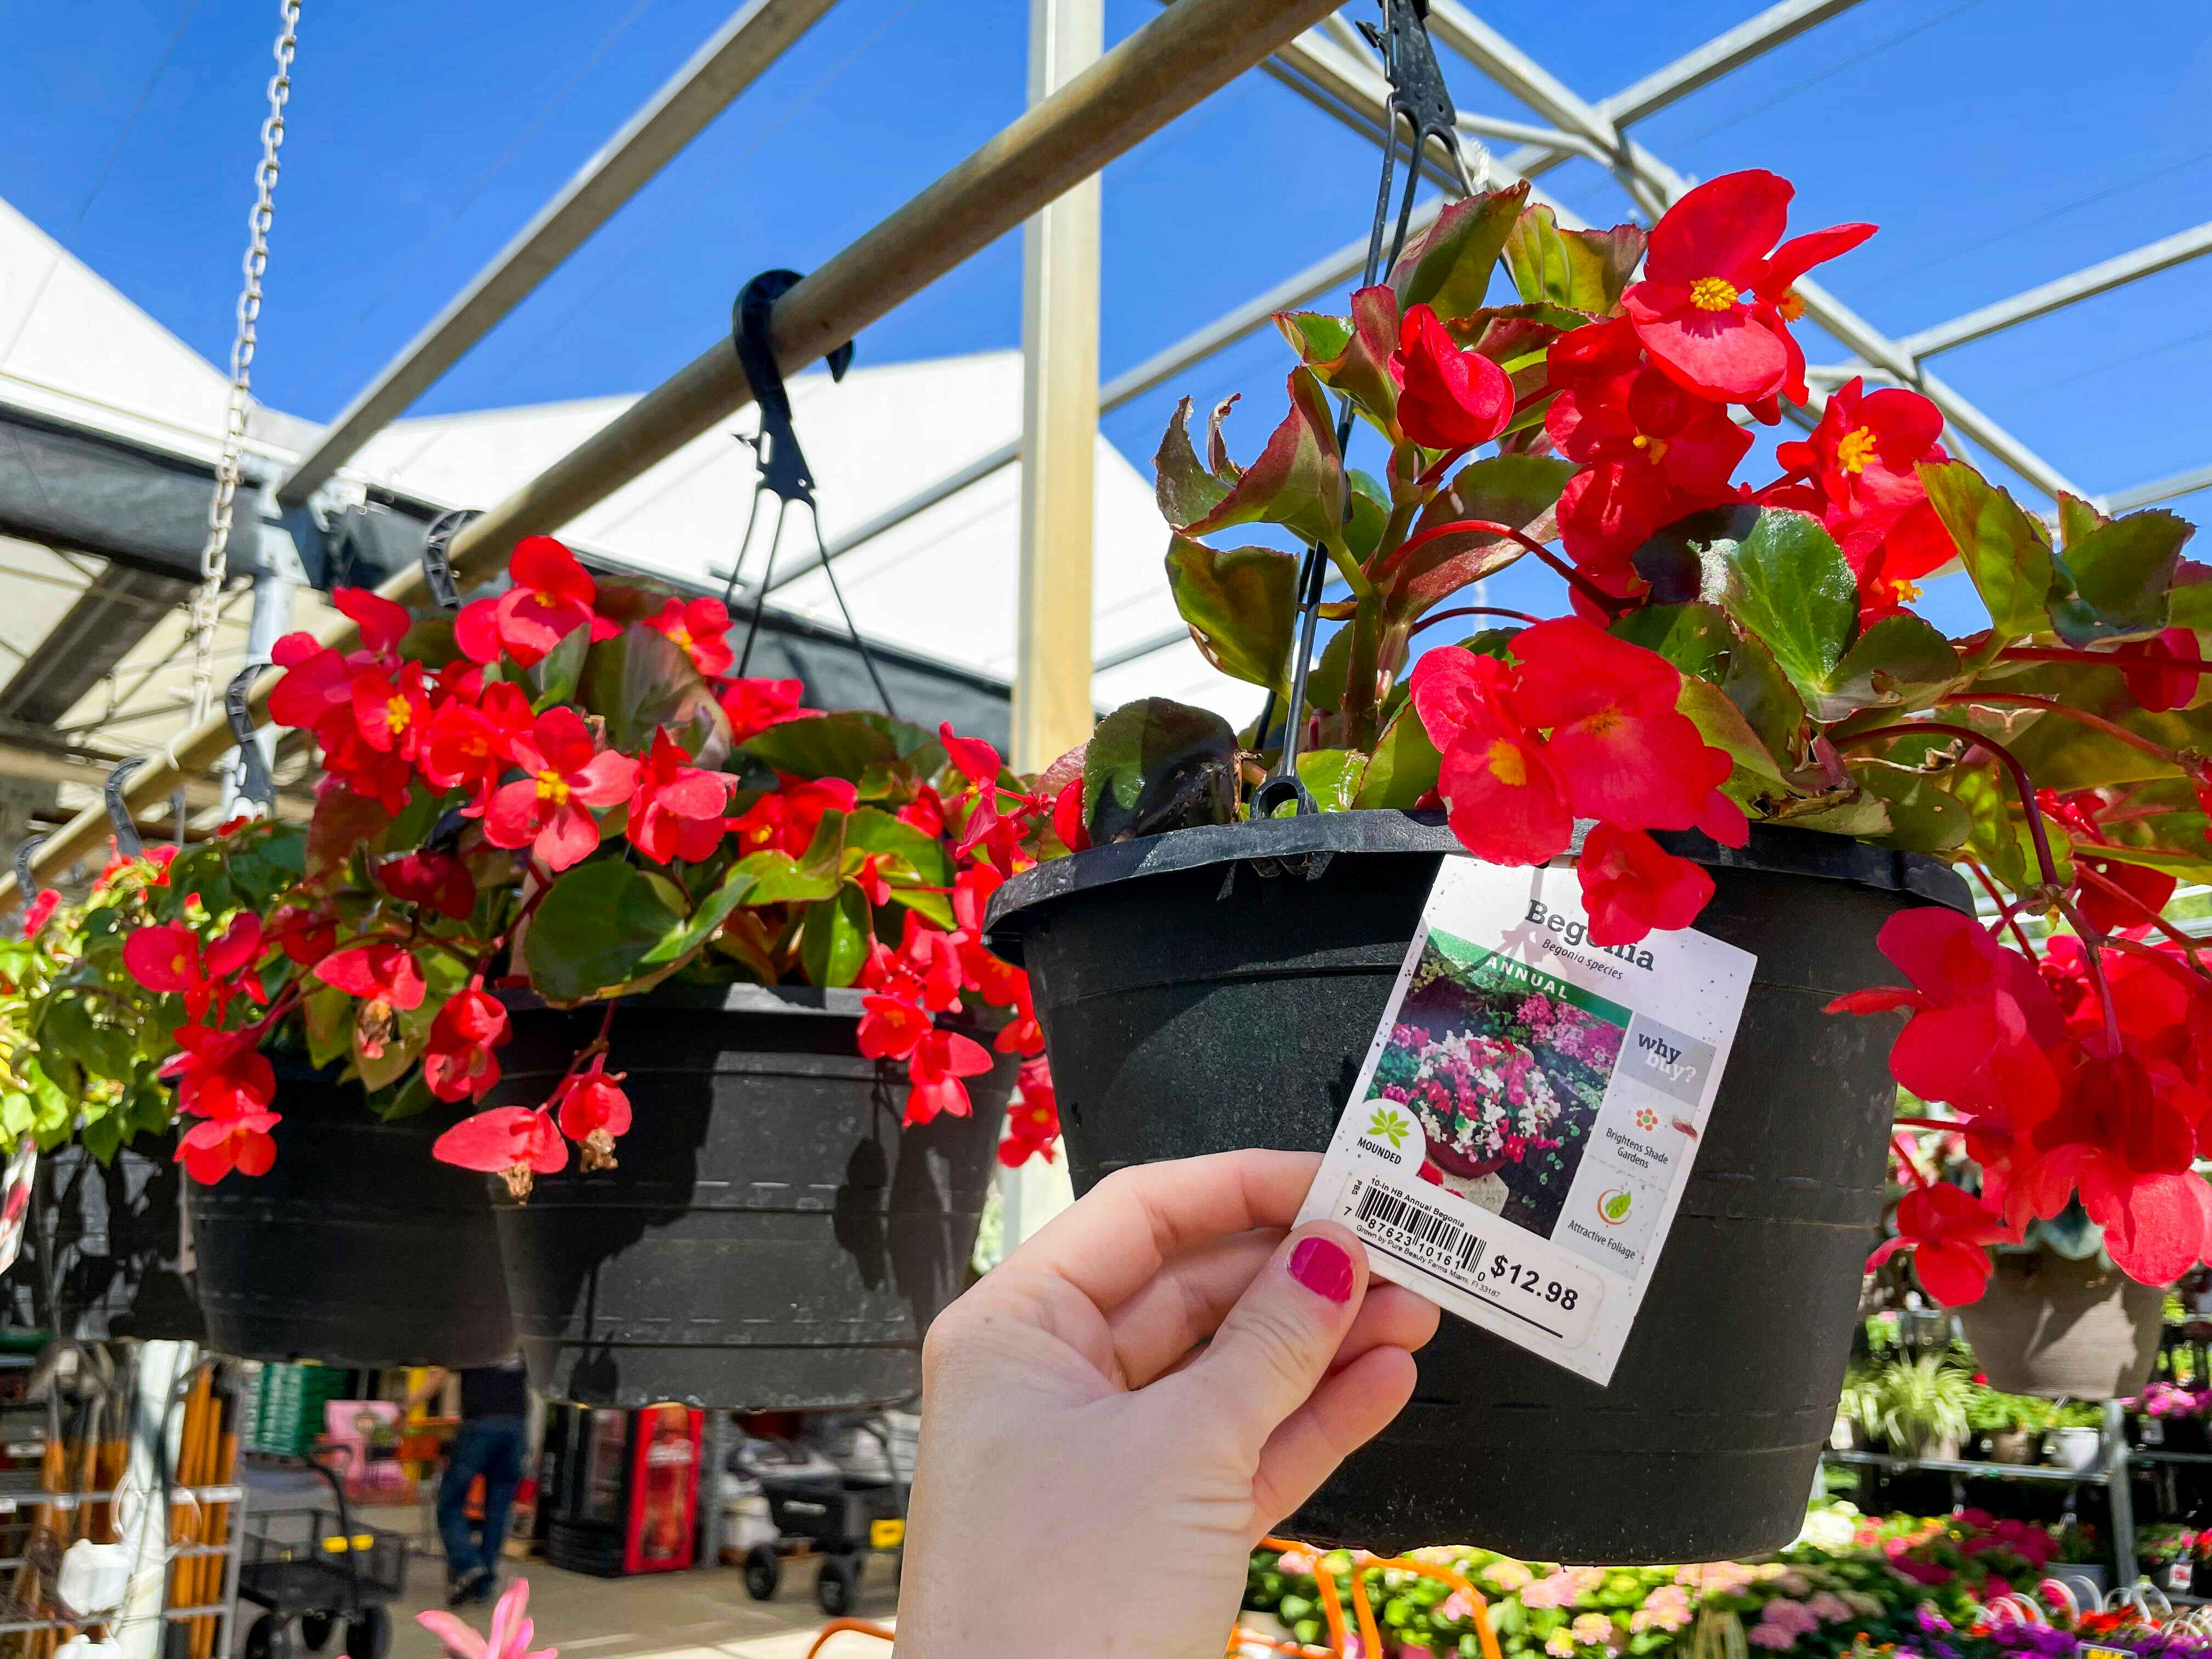 A tag on a hanging flower basket with red Begonias that shows a price of $12.98